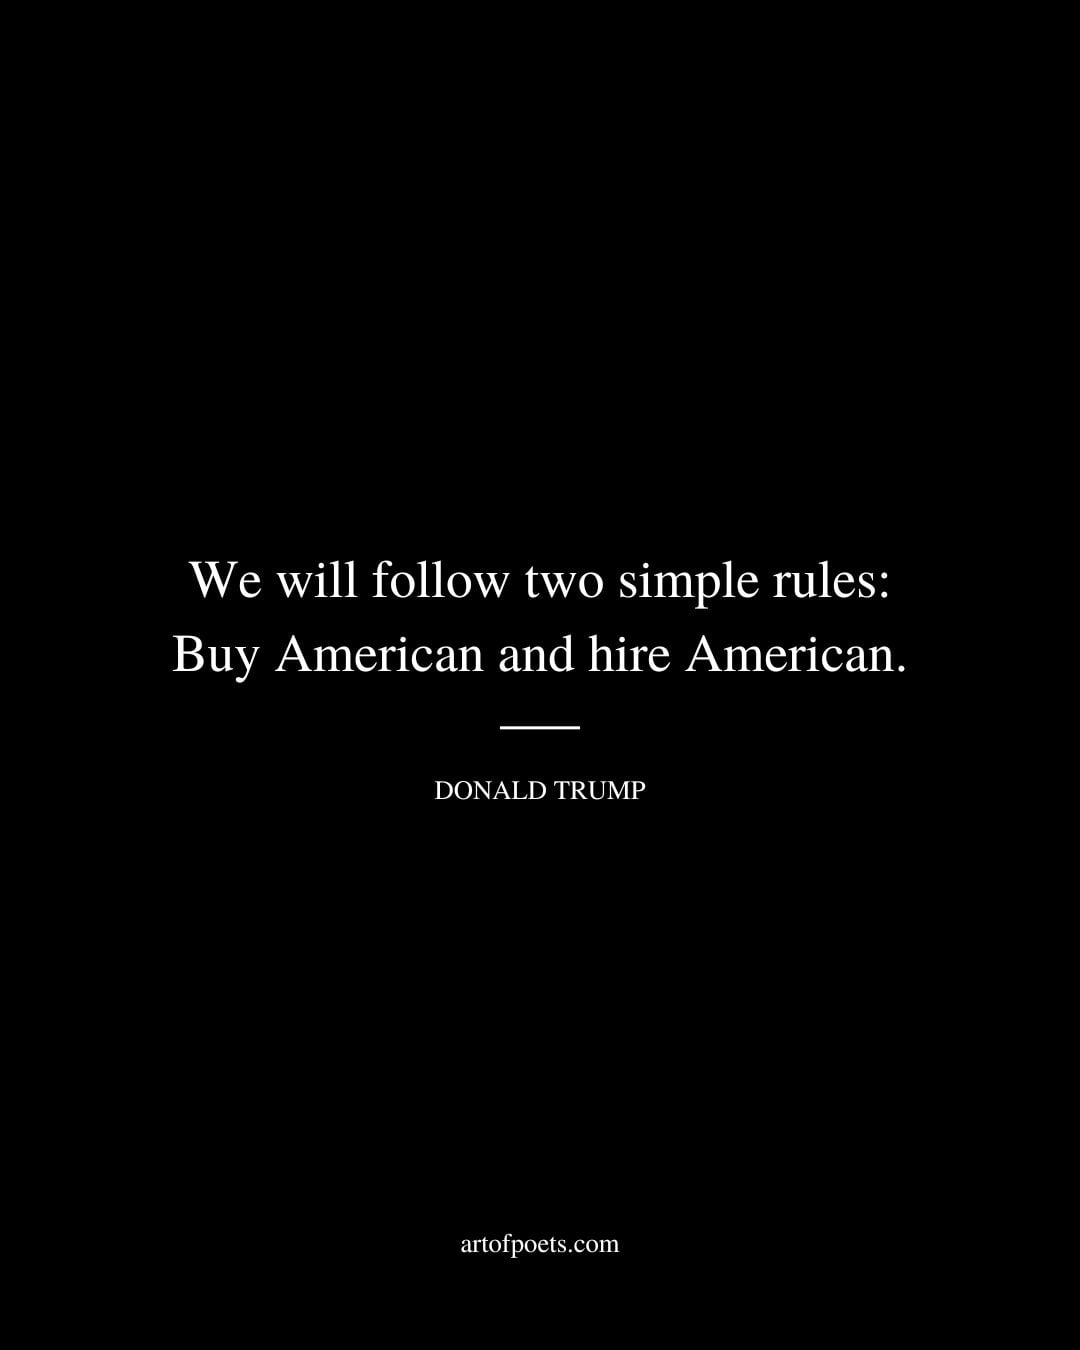 We will follow two simple rules Buy American and hire American